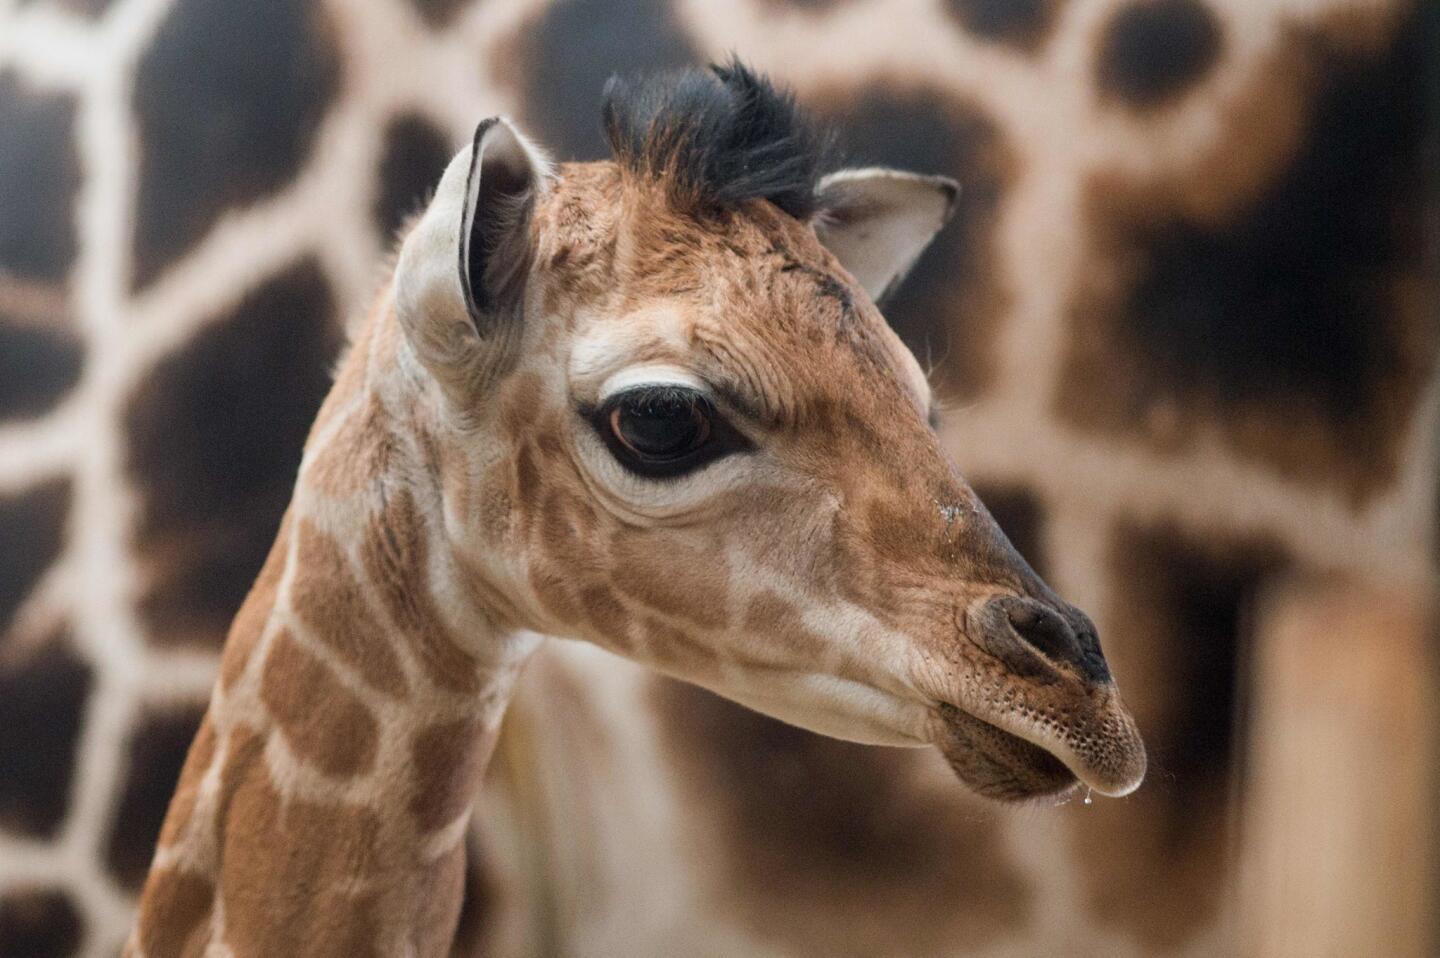 A Rothschild's giraffe baby stands next to its mother Jan. 16, 2017, at the zoo in Magdeburg, Germany. The male baby giraffe was born Jan. 10, 2017.